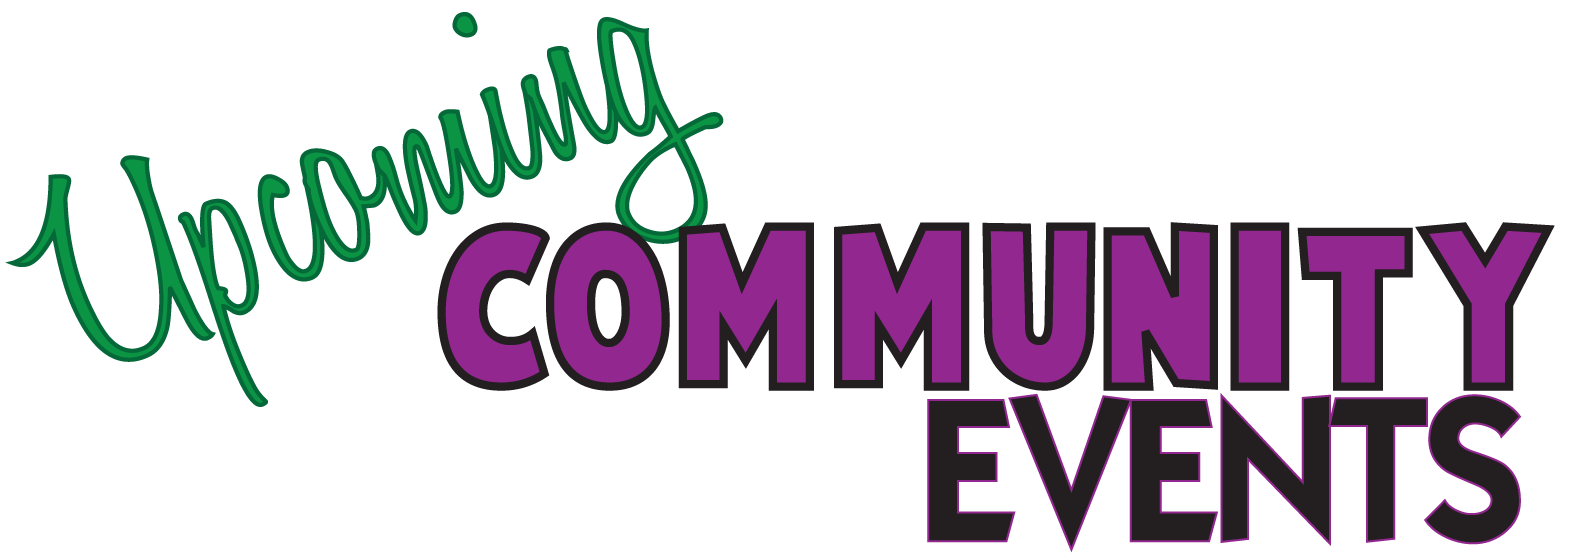 Click On The Link Below To Access Information About Community Events    